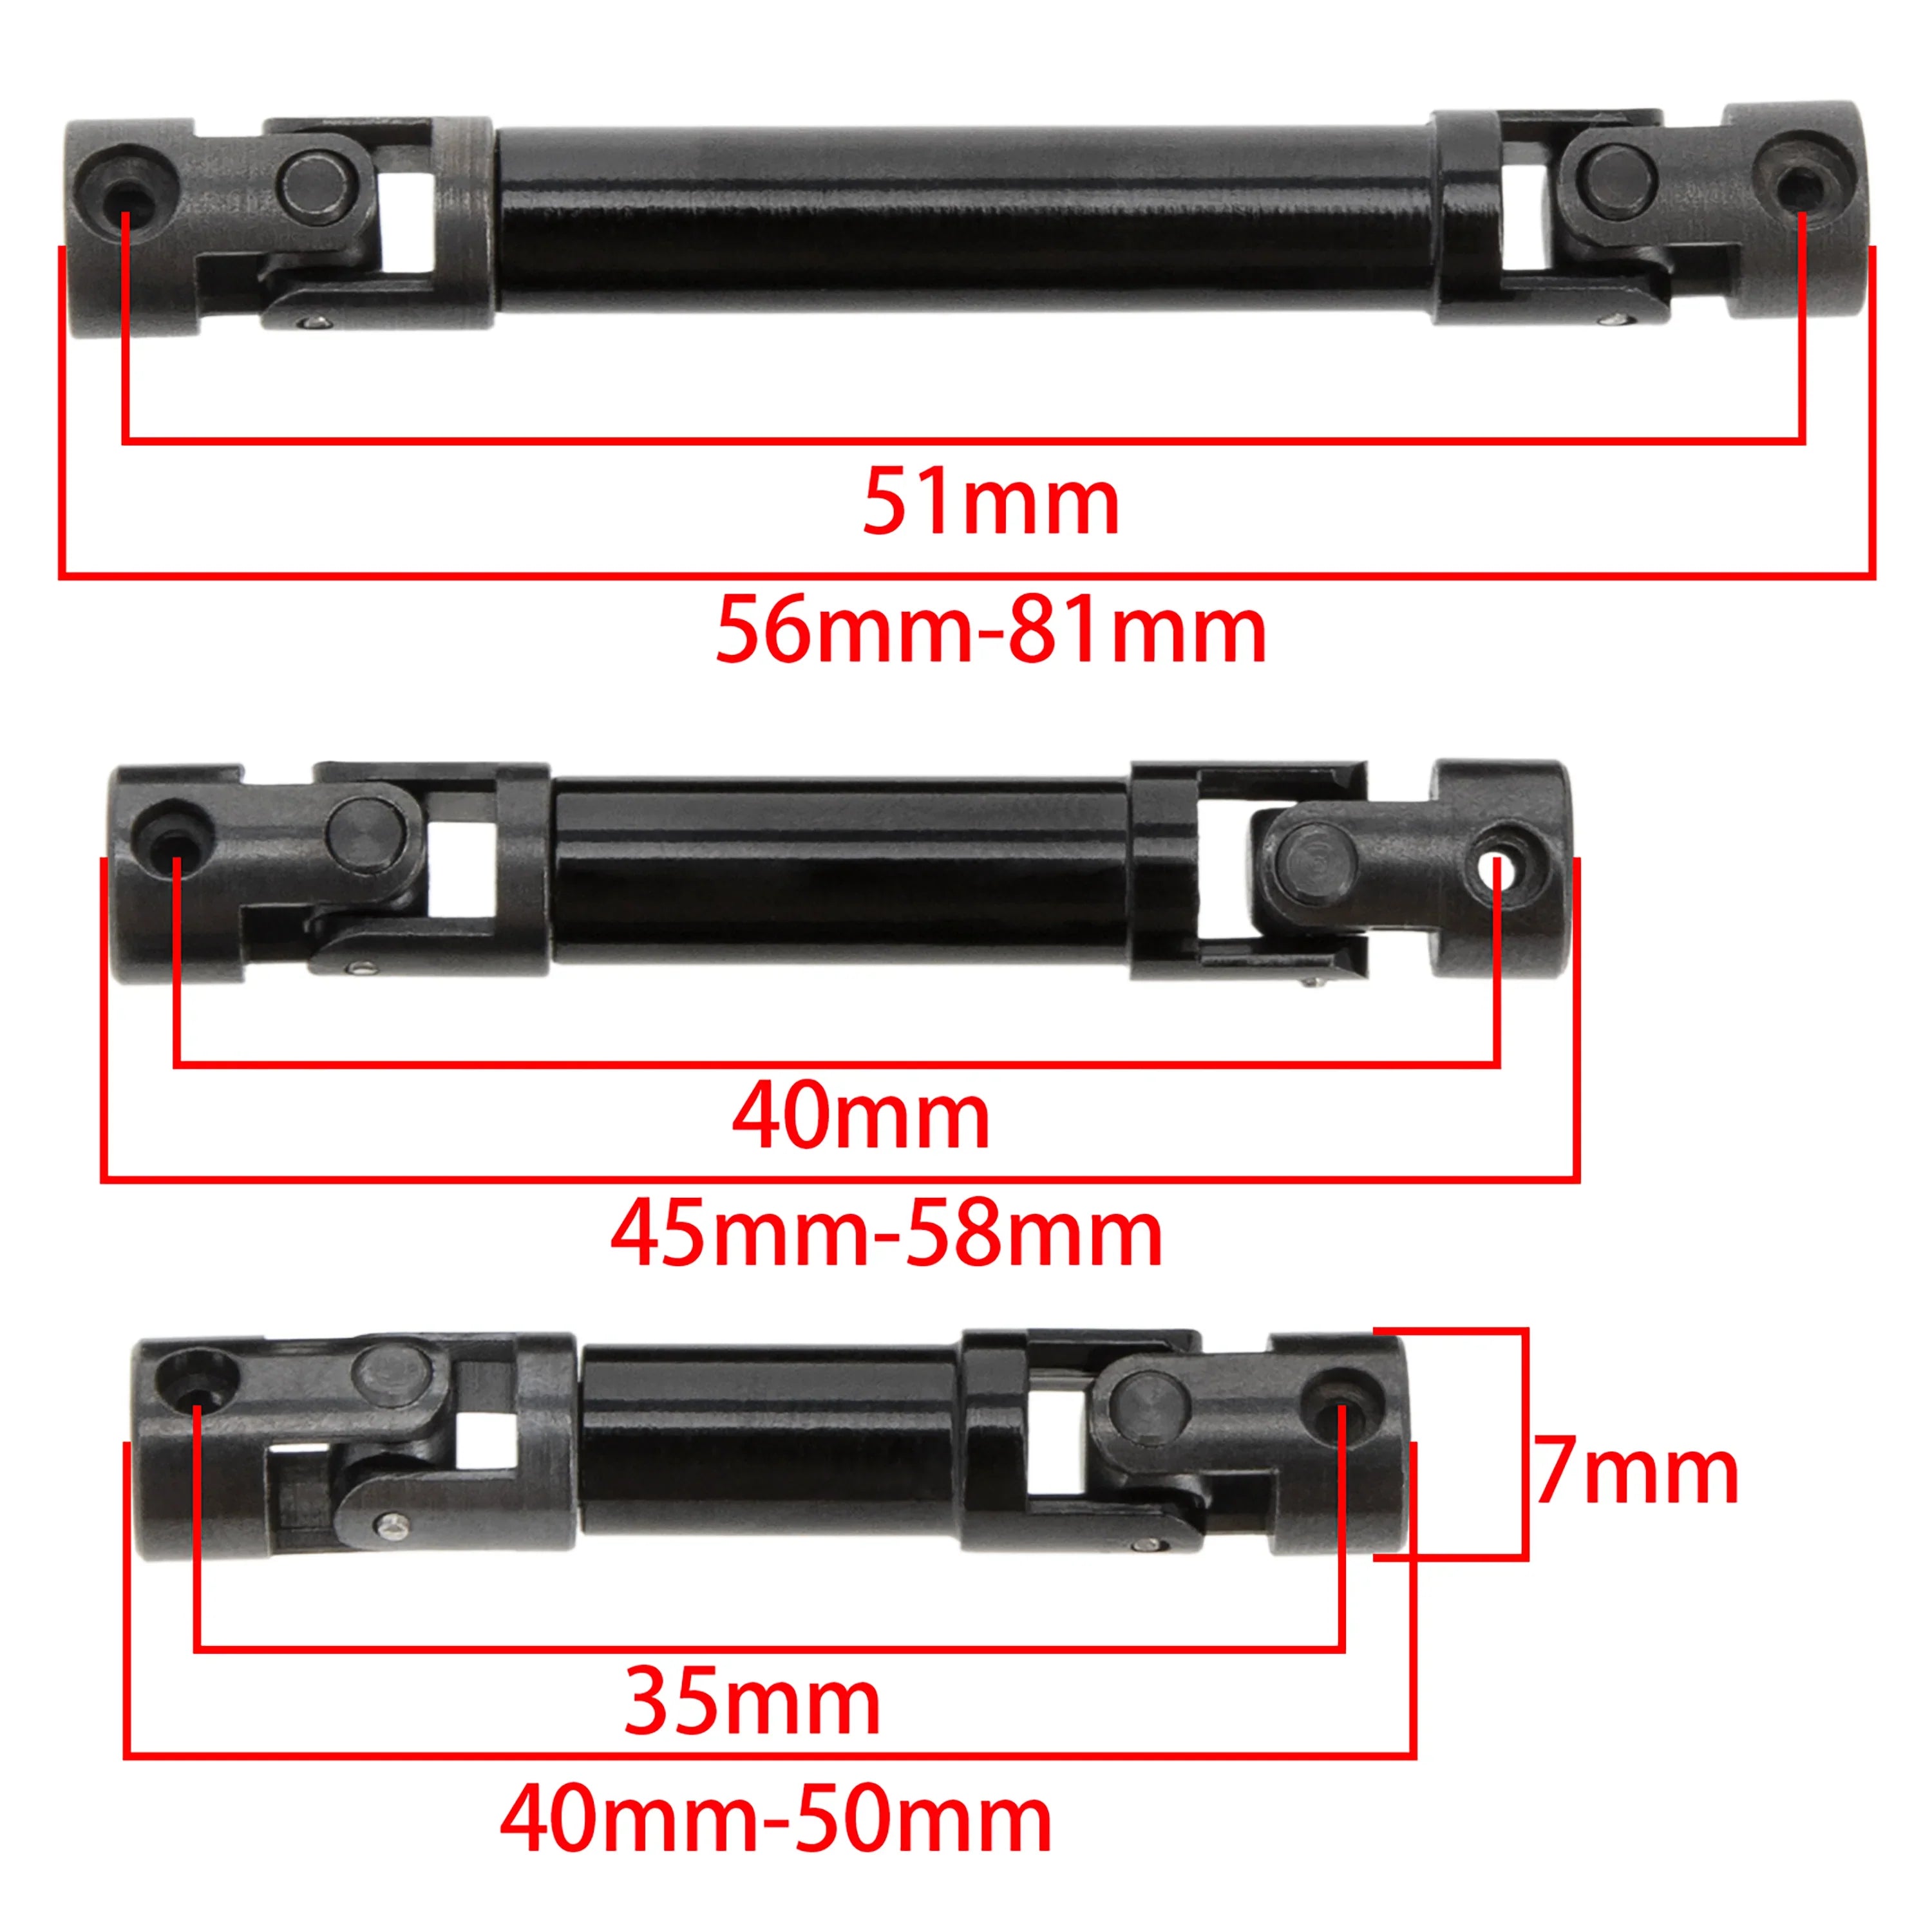 Copy of Meus Racing Aluminum High Clearance Links /Steel Driveshaft Set For Axial SCX24 6×6 Refit Kits - BLACK - HeliDirect